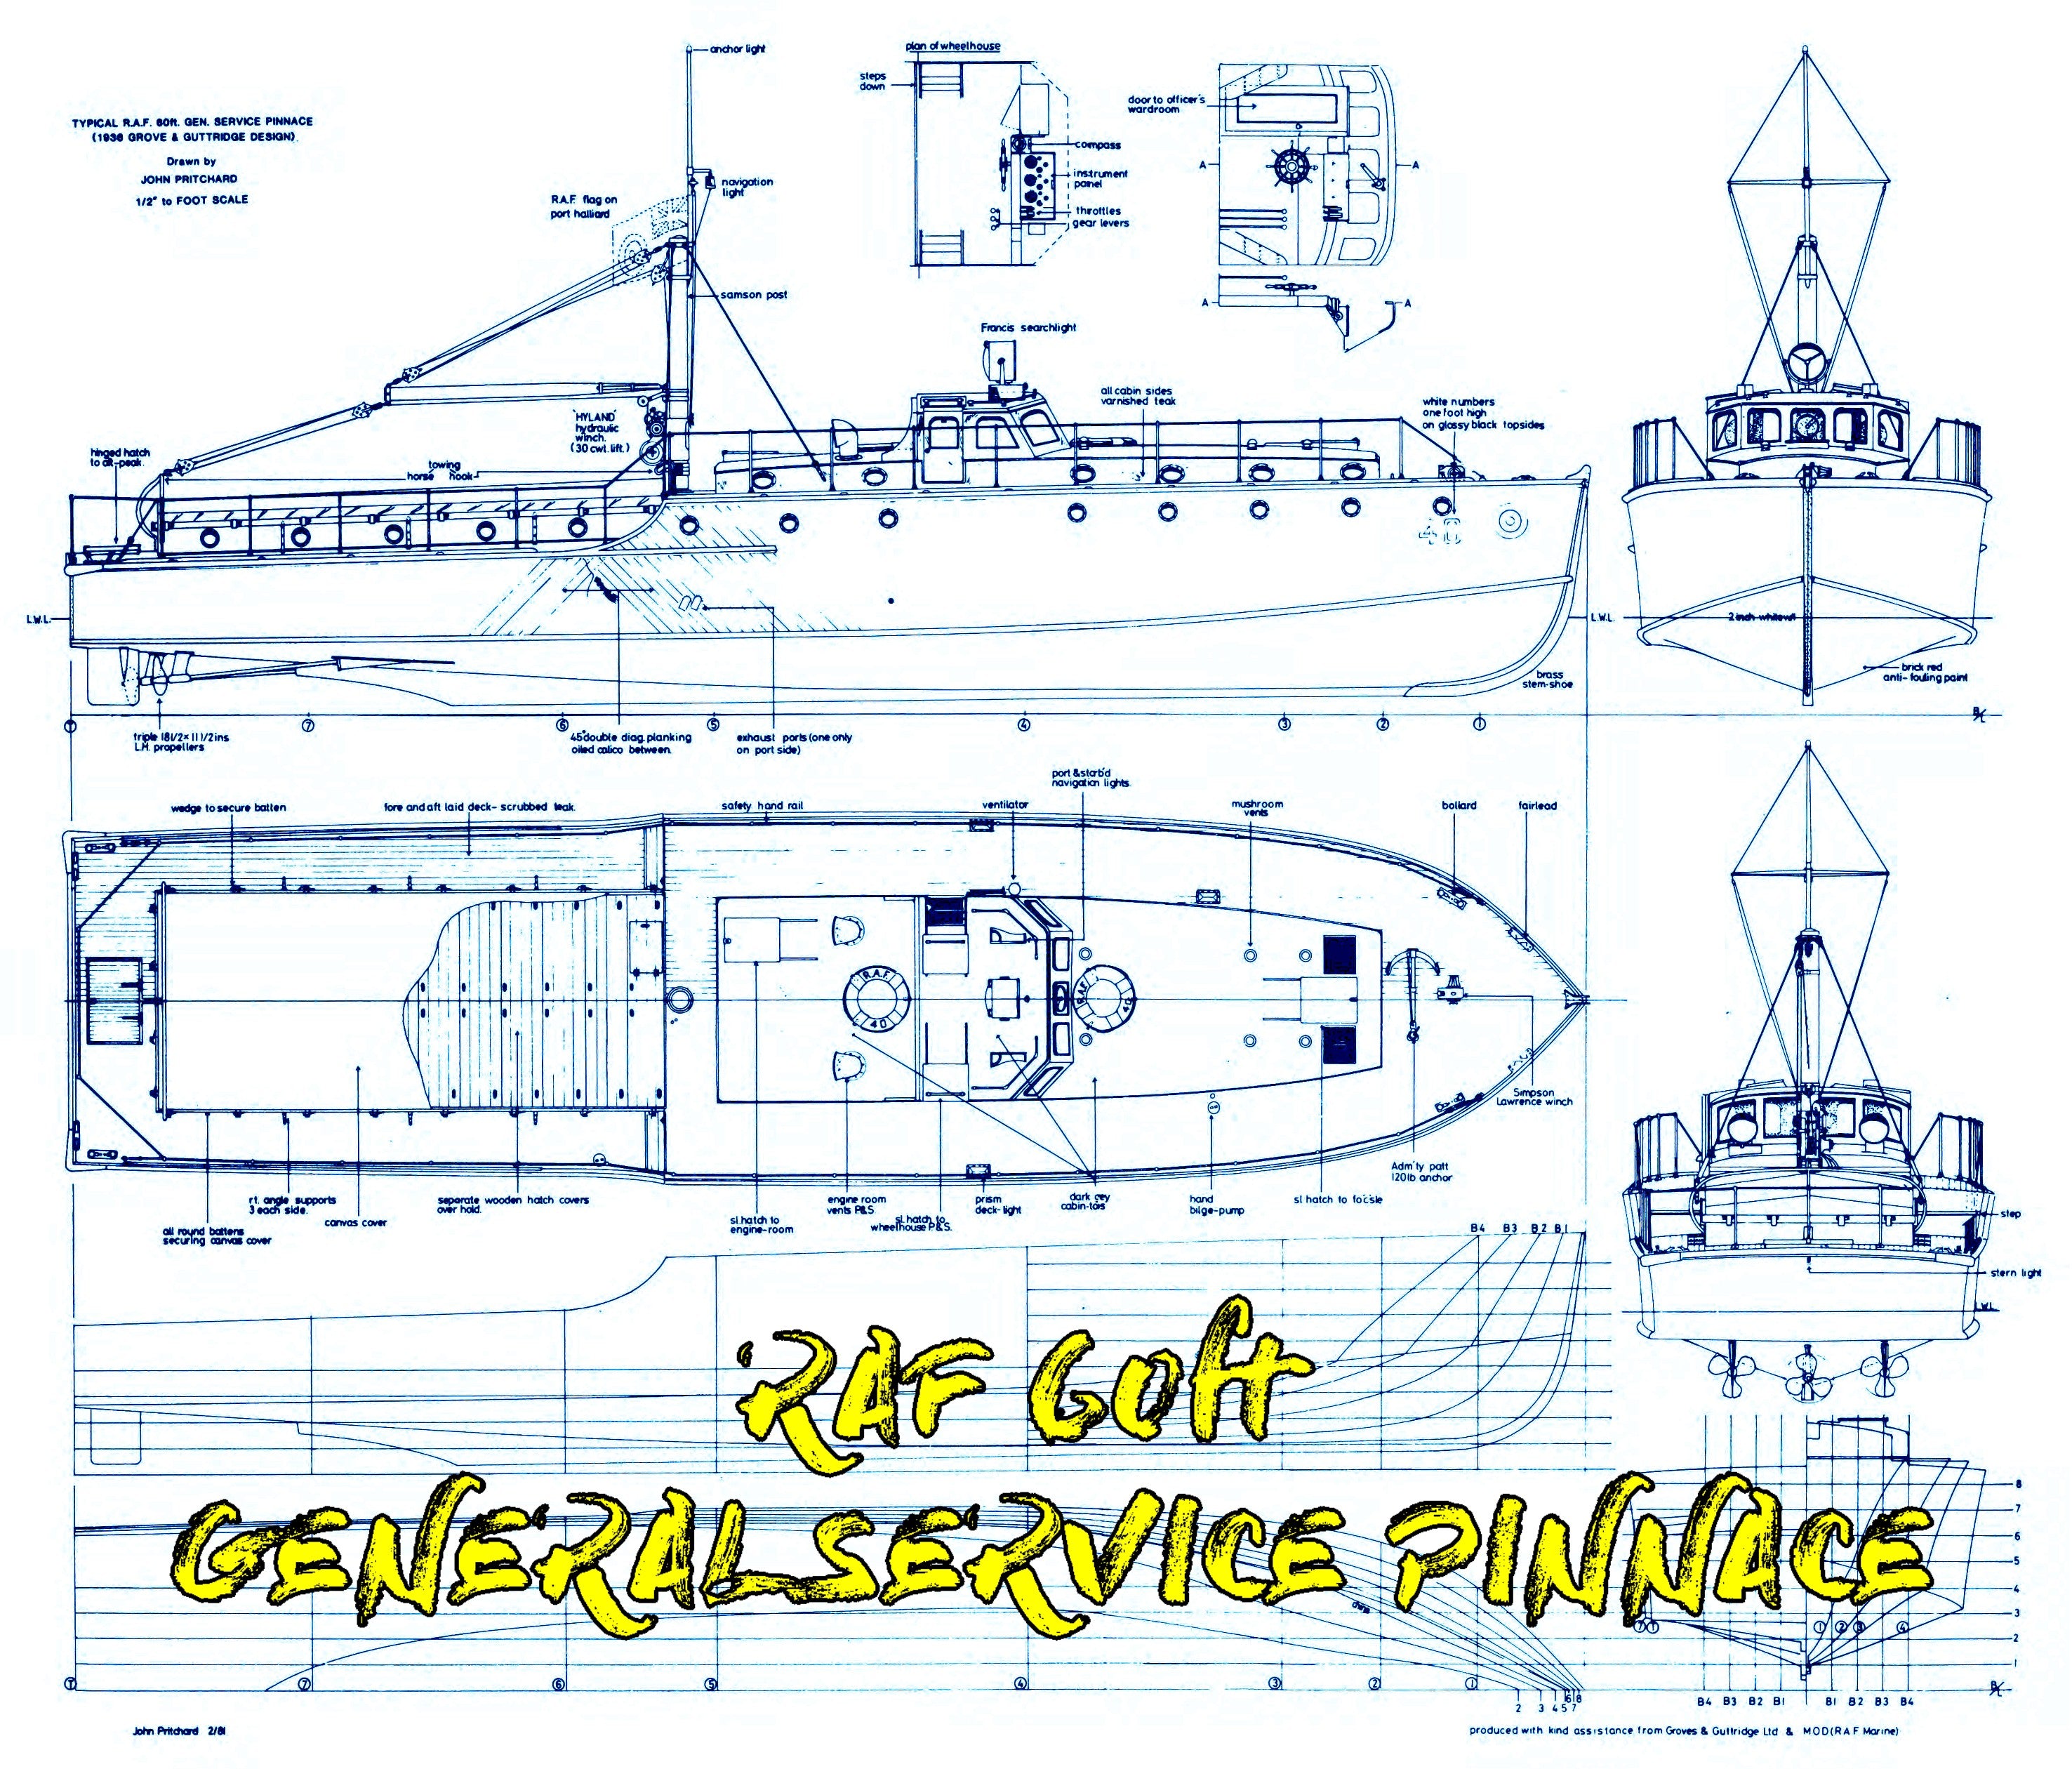 full size printed plans 60ft  general service pinnace scale 1/2” = 1 foot  l30”  b7 .375"  suitable for radio control